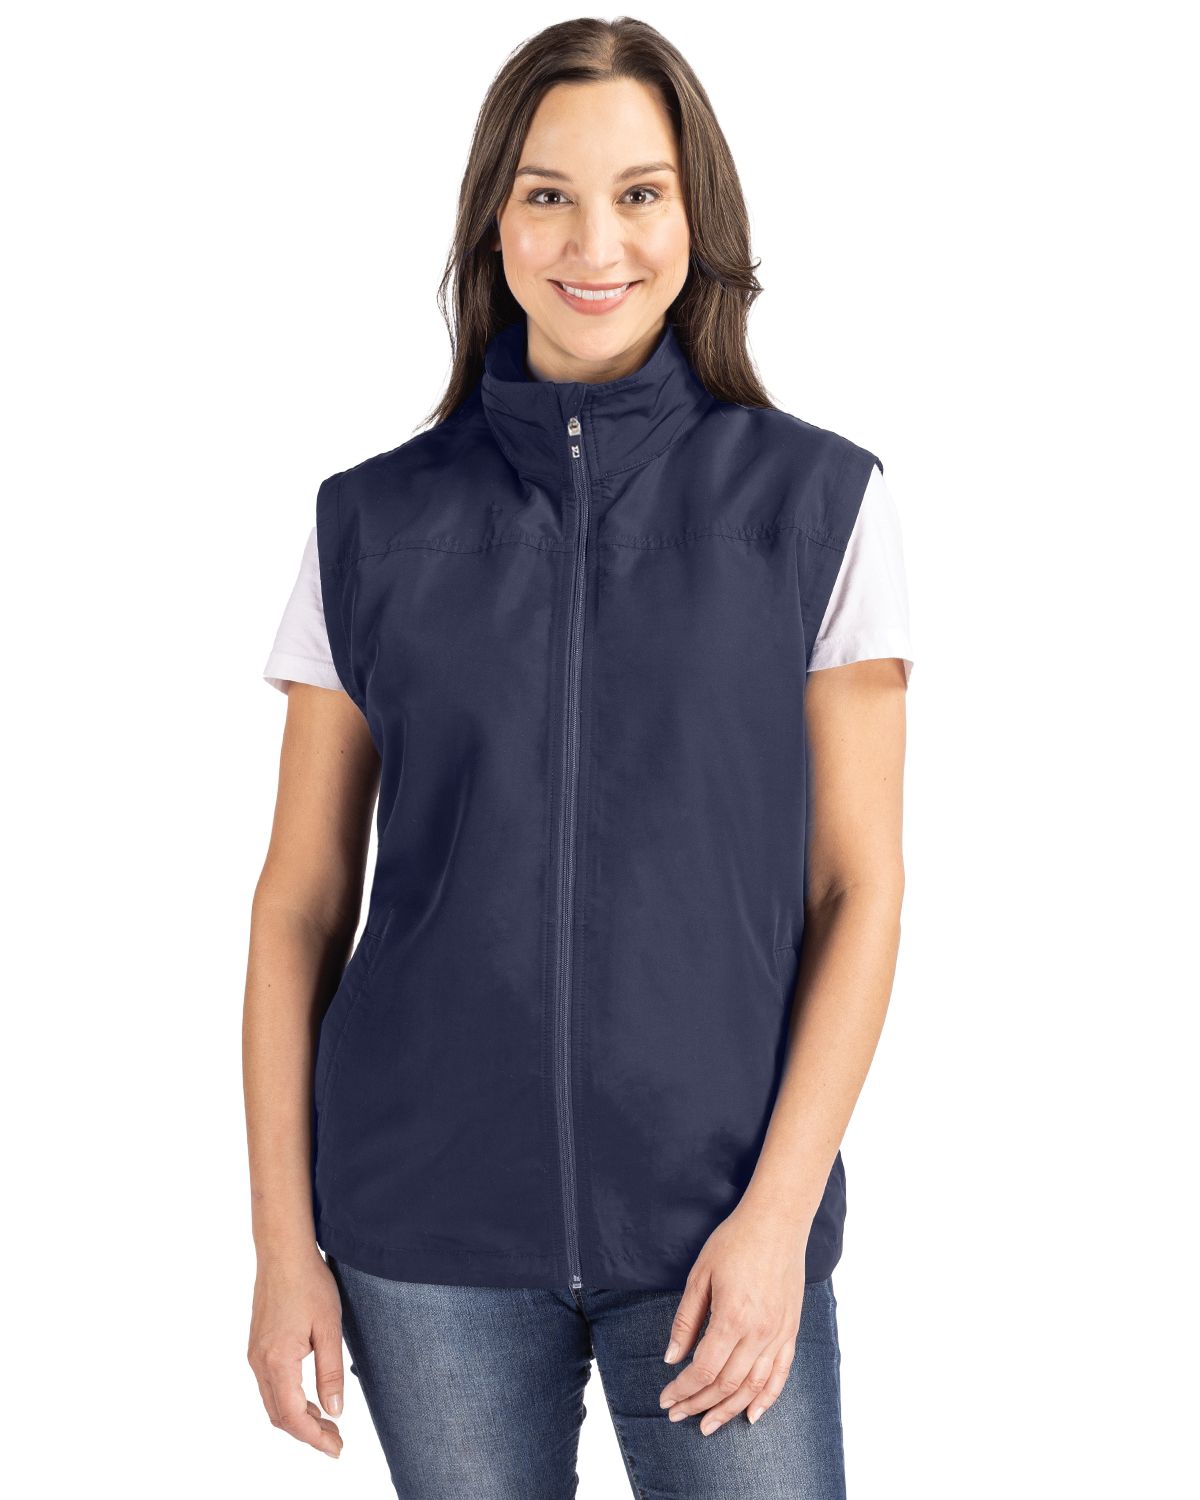 Women's Charter Eco Recycled Full-Zip Vest - Polished